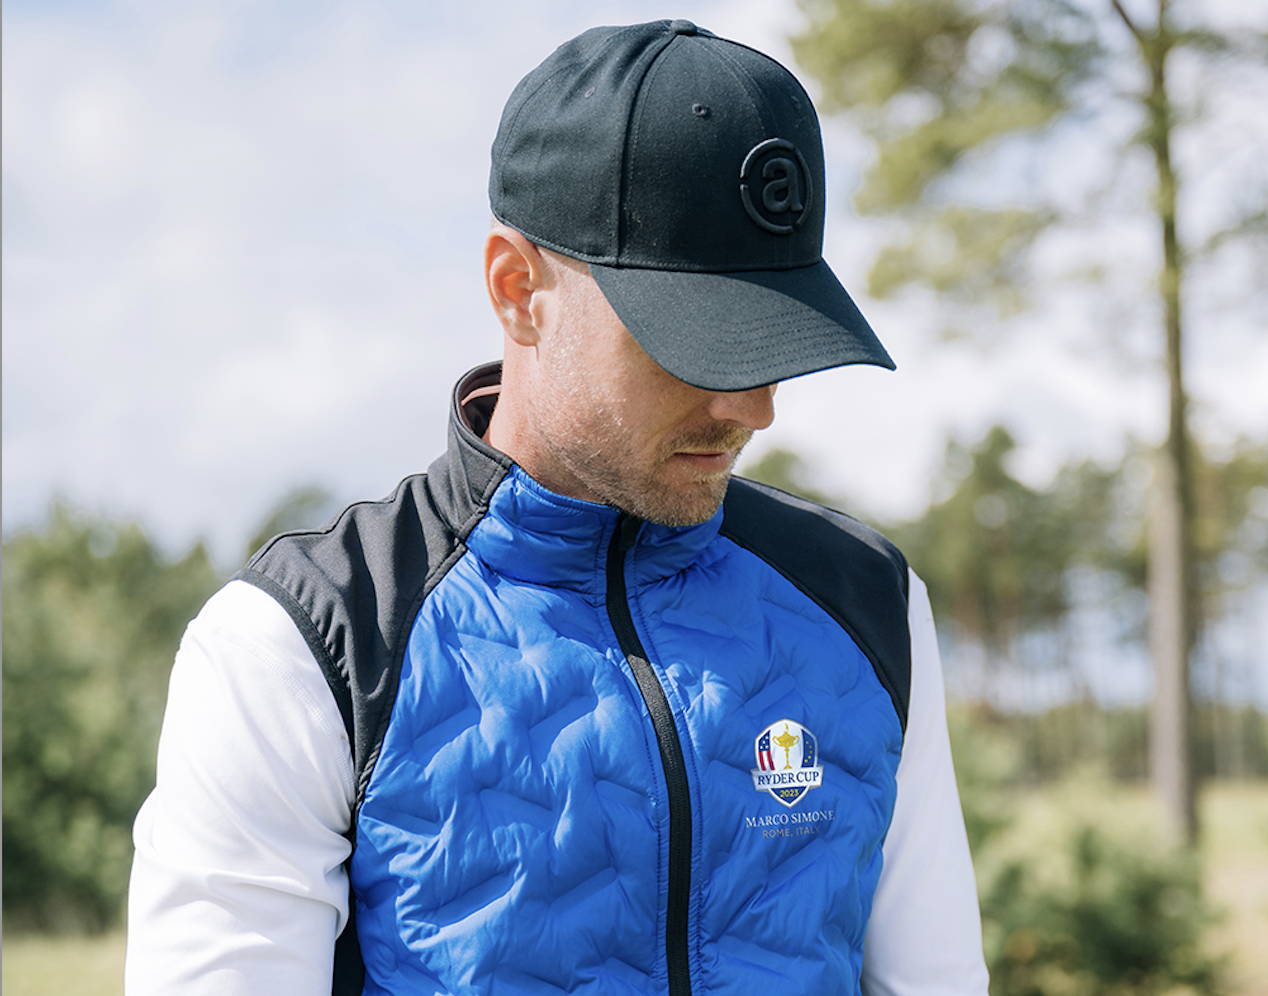 Abacus launches official Ryder Cup apparel collection – Golf News